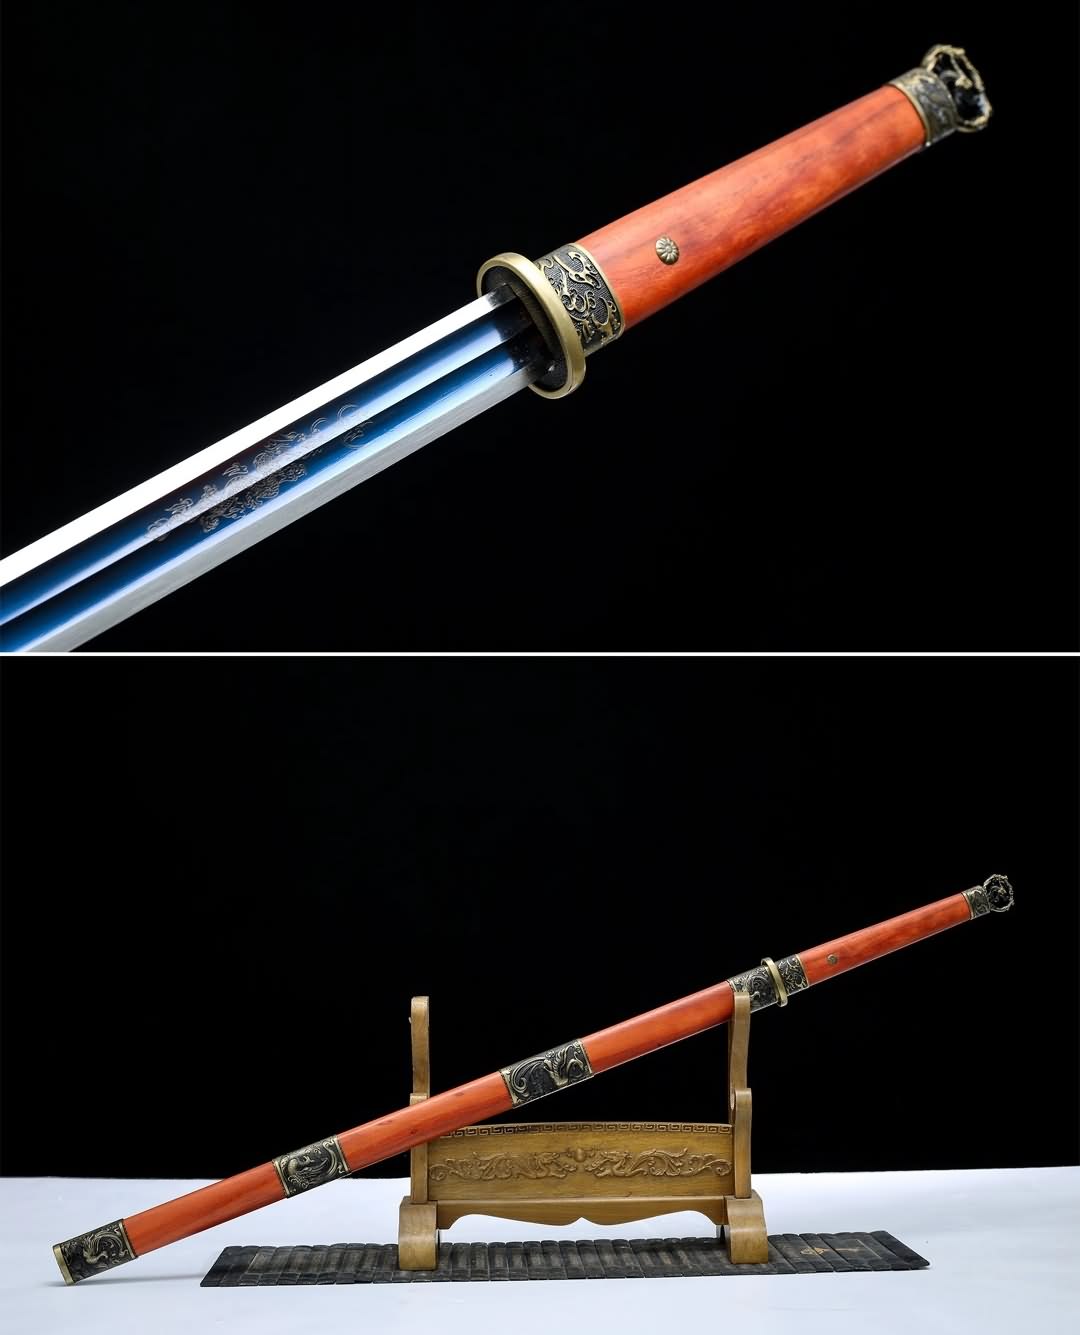 Han jian Sword,Kung fu(Forged High Carbon Steel Blade,Redwood Scabbard) Full Tang,Chinese Sword